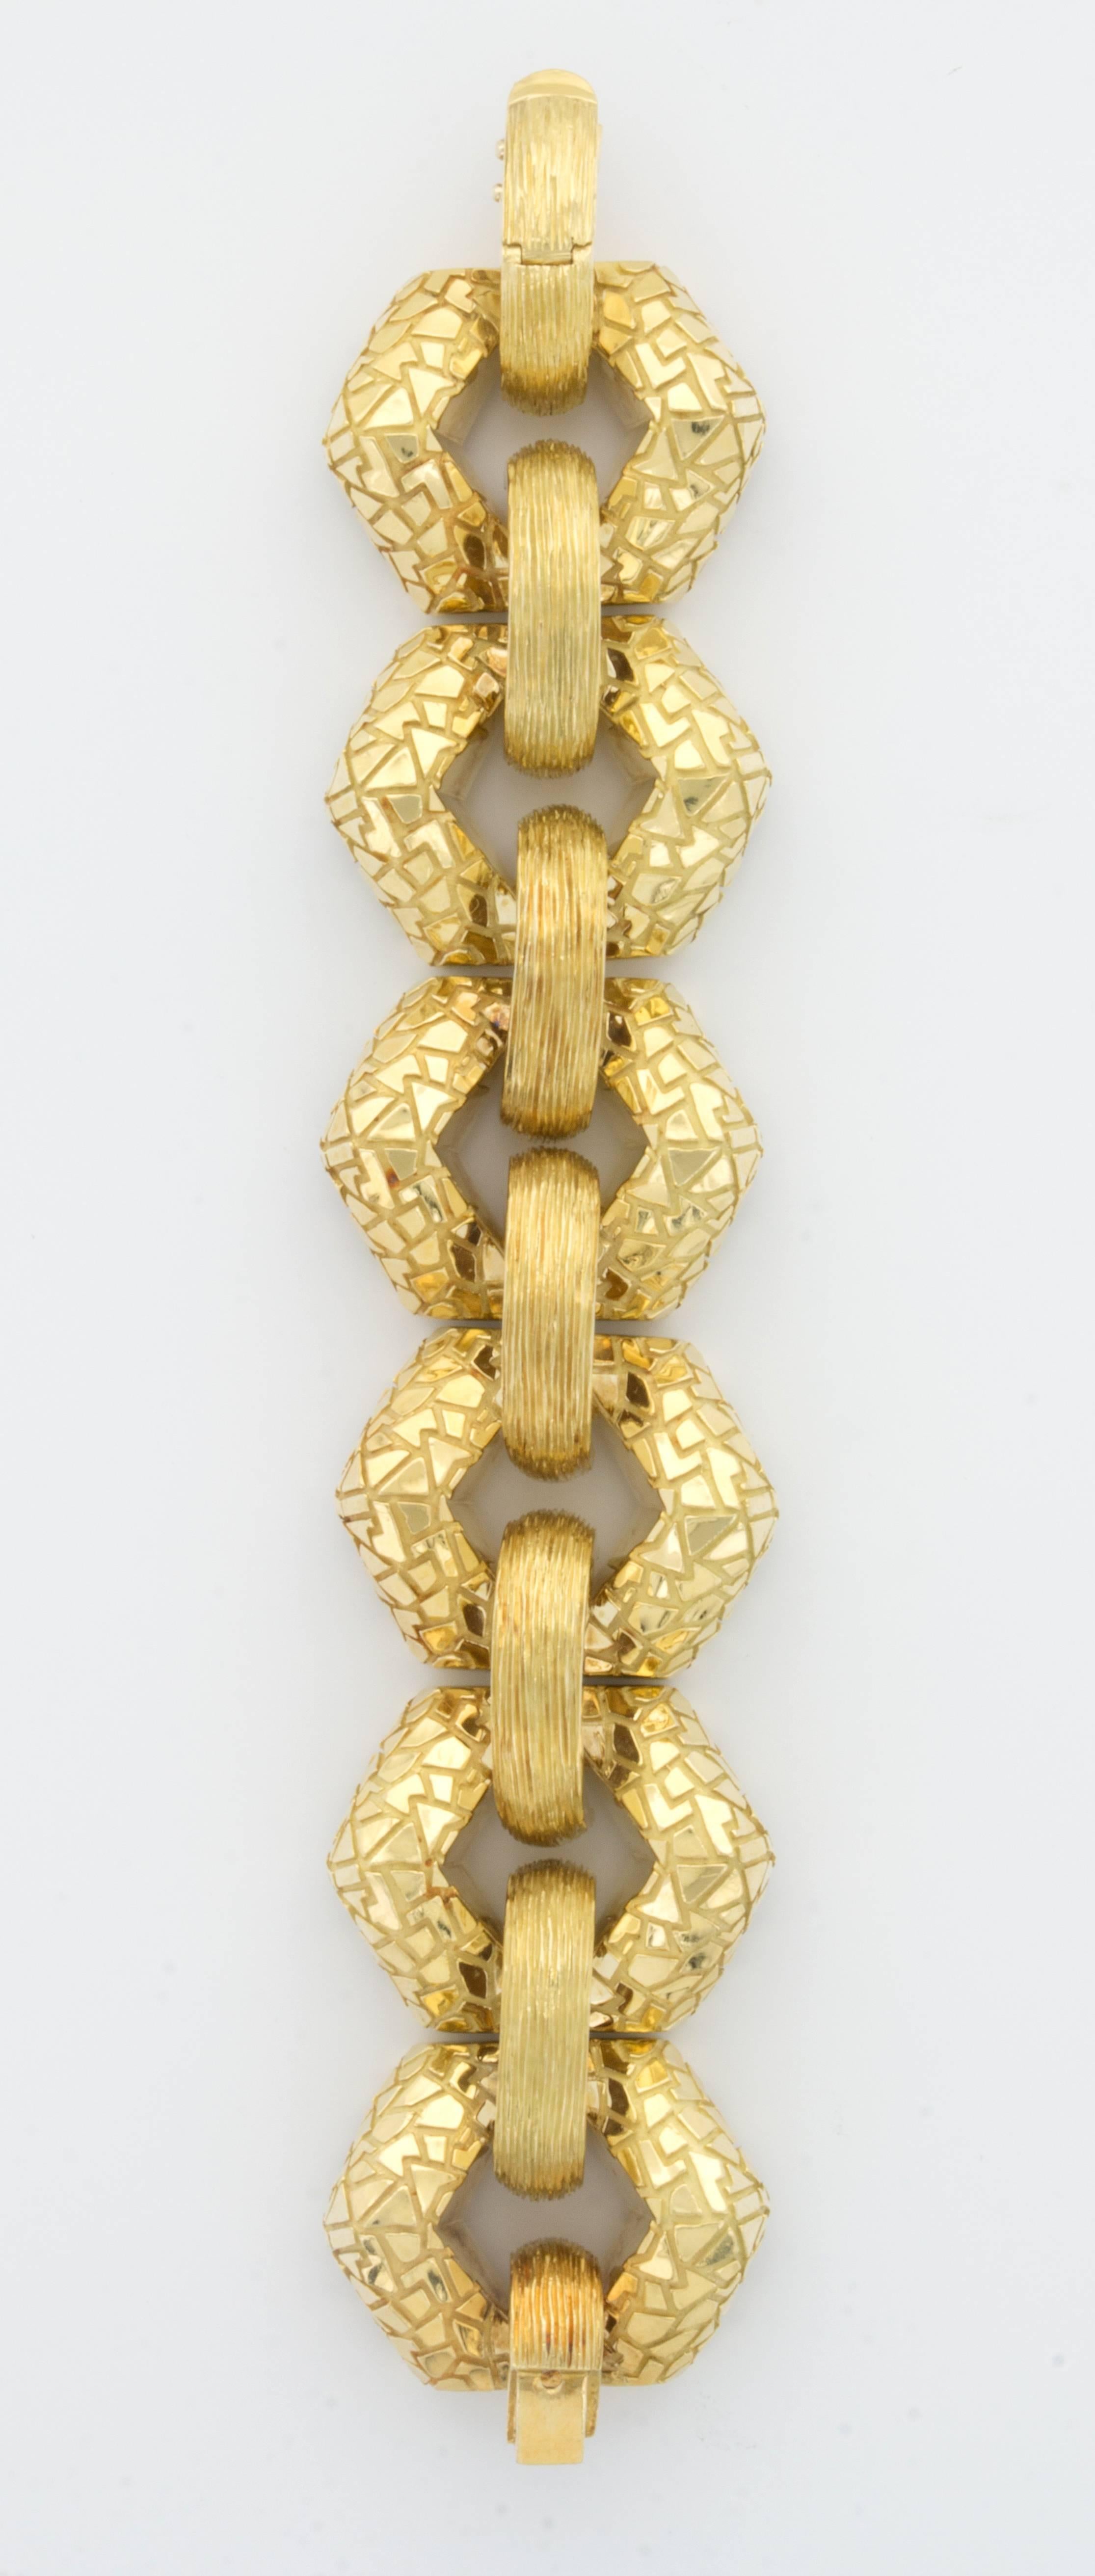 A large textured chain-link bracelet in 18k yellow gold by designer Henry Dunay. Very wide, substantial and stylish. 

159 grams.

1990's
